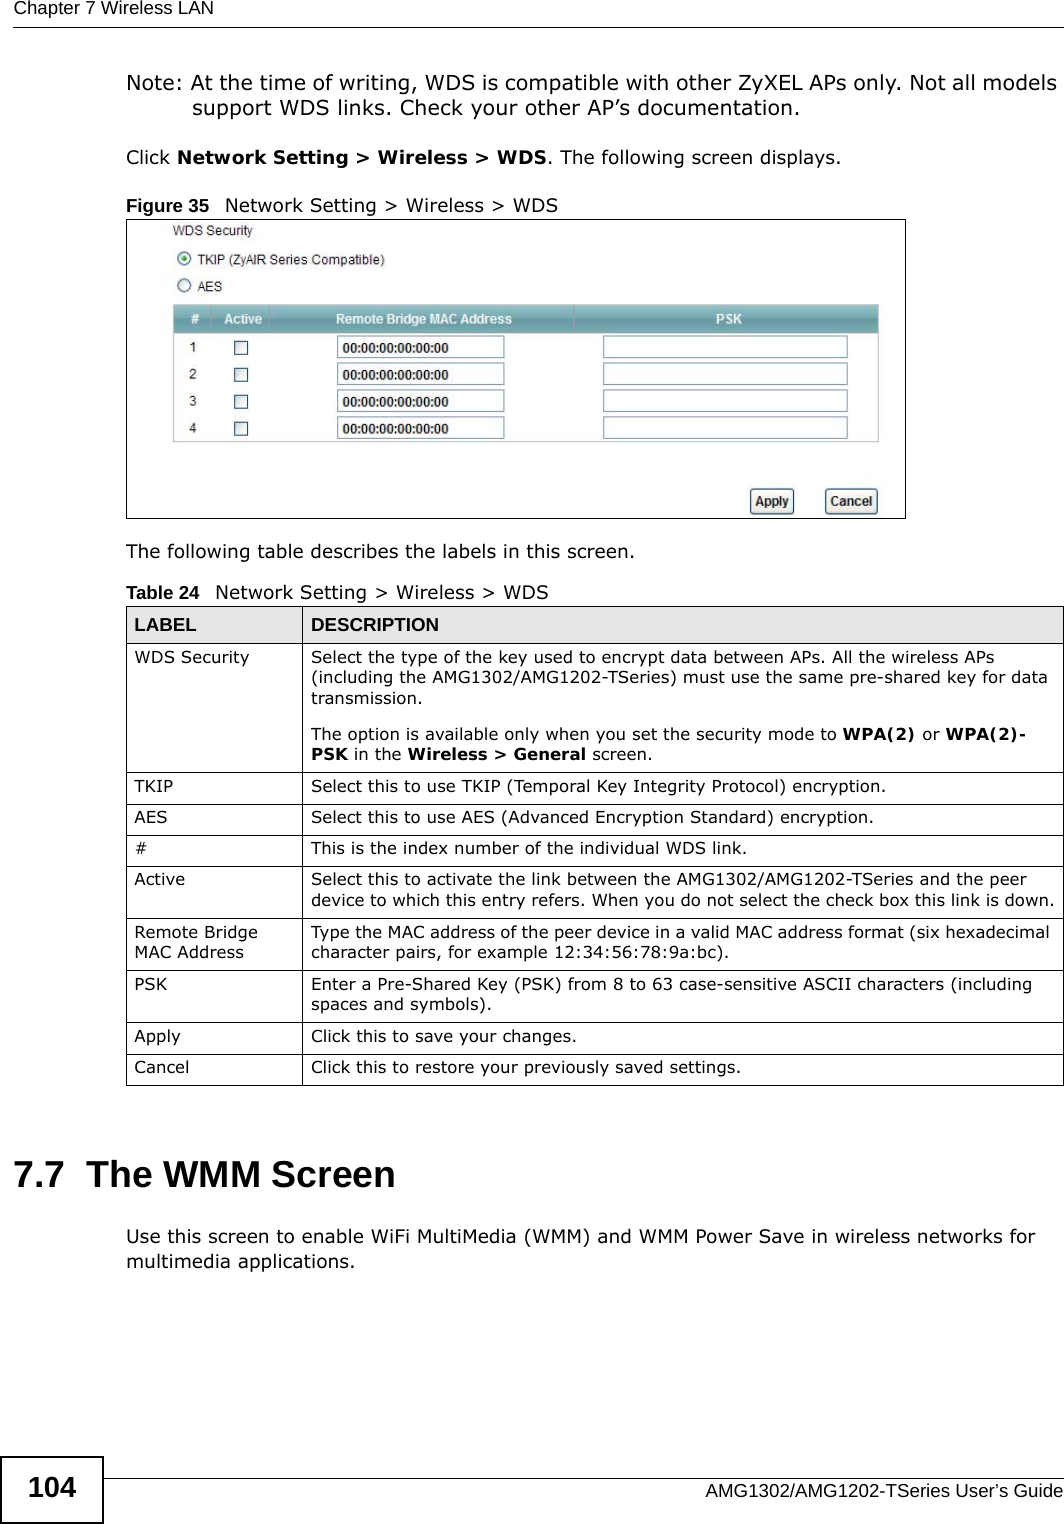 Chapter 7 Wireless LANAMG1302/AMG1202-TSeries User’s Guide104Note: At the time of writing, WDS is compatible with other ZyXEL APs only. Not all models support WDS links. Check your other AP’s documentation.Click Network Setting &gt; Wireless &gt; WDS. The following screen displays.Figure 35   Network Setting &gt; Wireless &gt; WDSThe following table describes the labels in this screen.7.7  The WMM ScreenUse this screen to enable WiFi MultiMedia (WMM) and WMM Power Save in wireless networks for multimedia applications.Table 24   Network Setting &gt; Wireless &gt; WDSLABEL DESCRIPTIONWDS Security Select the type of the key used to encrypt data between APs. All the wireless APs (including the AMG1302/AMG1202-TSeries) must use the same pre-shared key for data transmission.The option is available only when you set the security mode to WPA(2) or WPA(2)-PSK in the Wireless &gt; General screen.TKIP Select this to use TKIP (Temporal Key Integrity Protocol) encryption.AES Select this to use AES (Advanced Encryption Standard) encryption. # This is the index number of the individual WDS link.Active Select this to activate the link between the AMG1302/AMG1202-TSeries and the peer device to which this entry refers. When you do not select the check box this link is down.Remote Bridge MAC AddressType the MAC address of the peer device in a valid MAC address format (six hexadecimal character pairs, for example 12:34:56:78:9a:bc).PSK Enter a Pre-Shared Key (PSK) from 8 to 63 case-sensitive ASCII characters (including spaces and symbols).Apply Click this to save your changes.Cancel Click this to restore your previously saved settings.